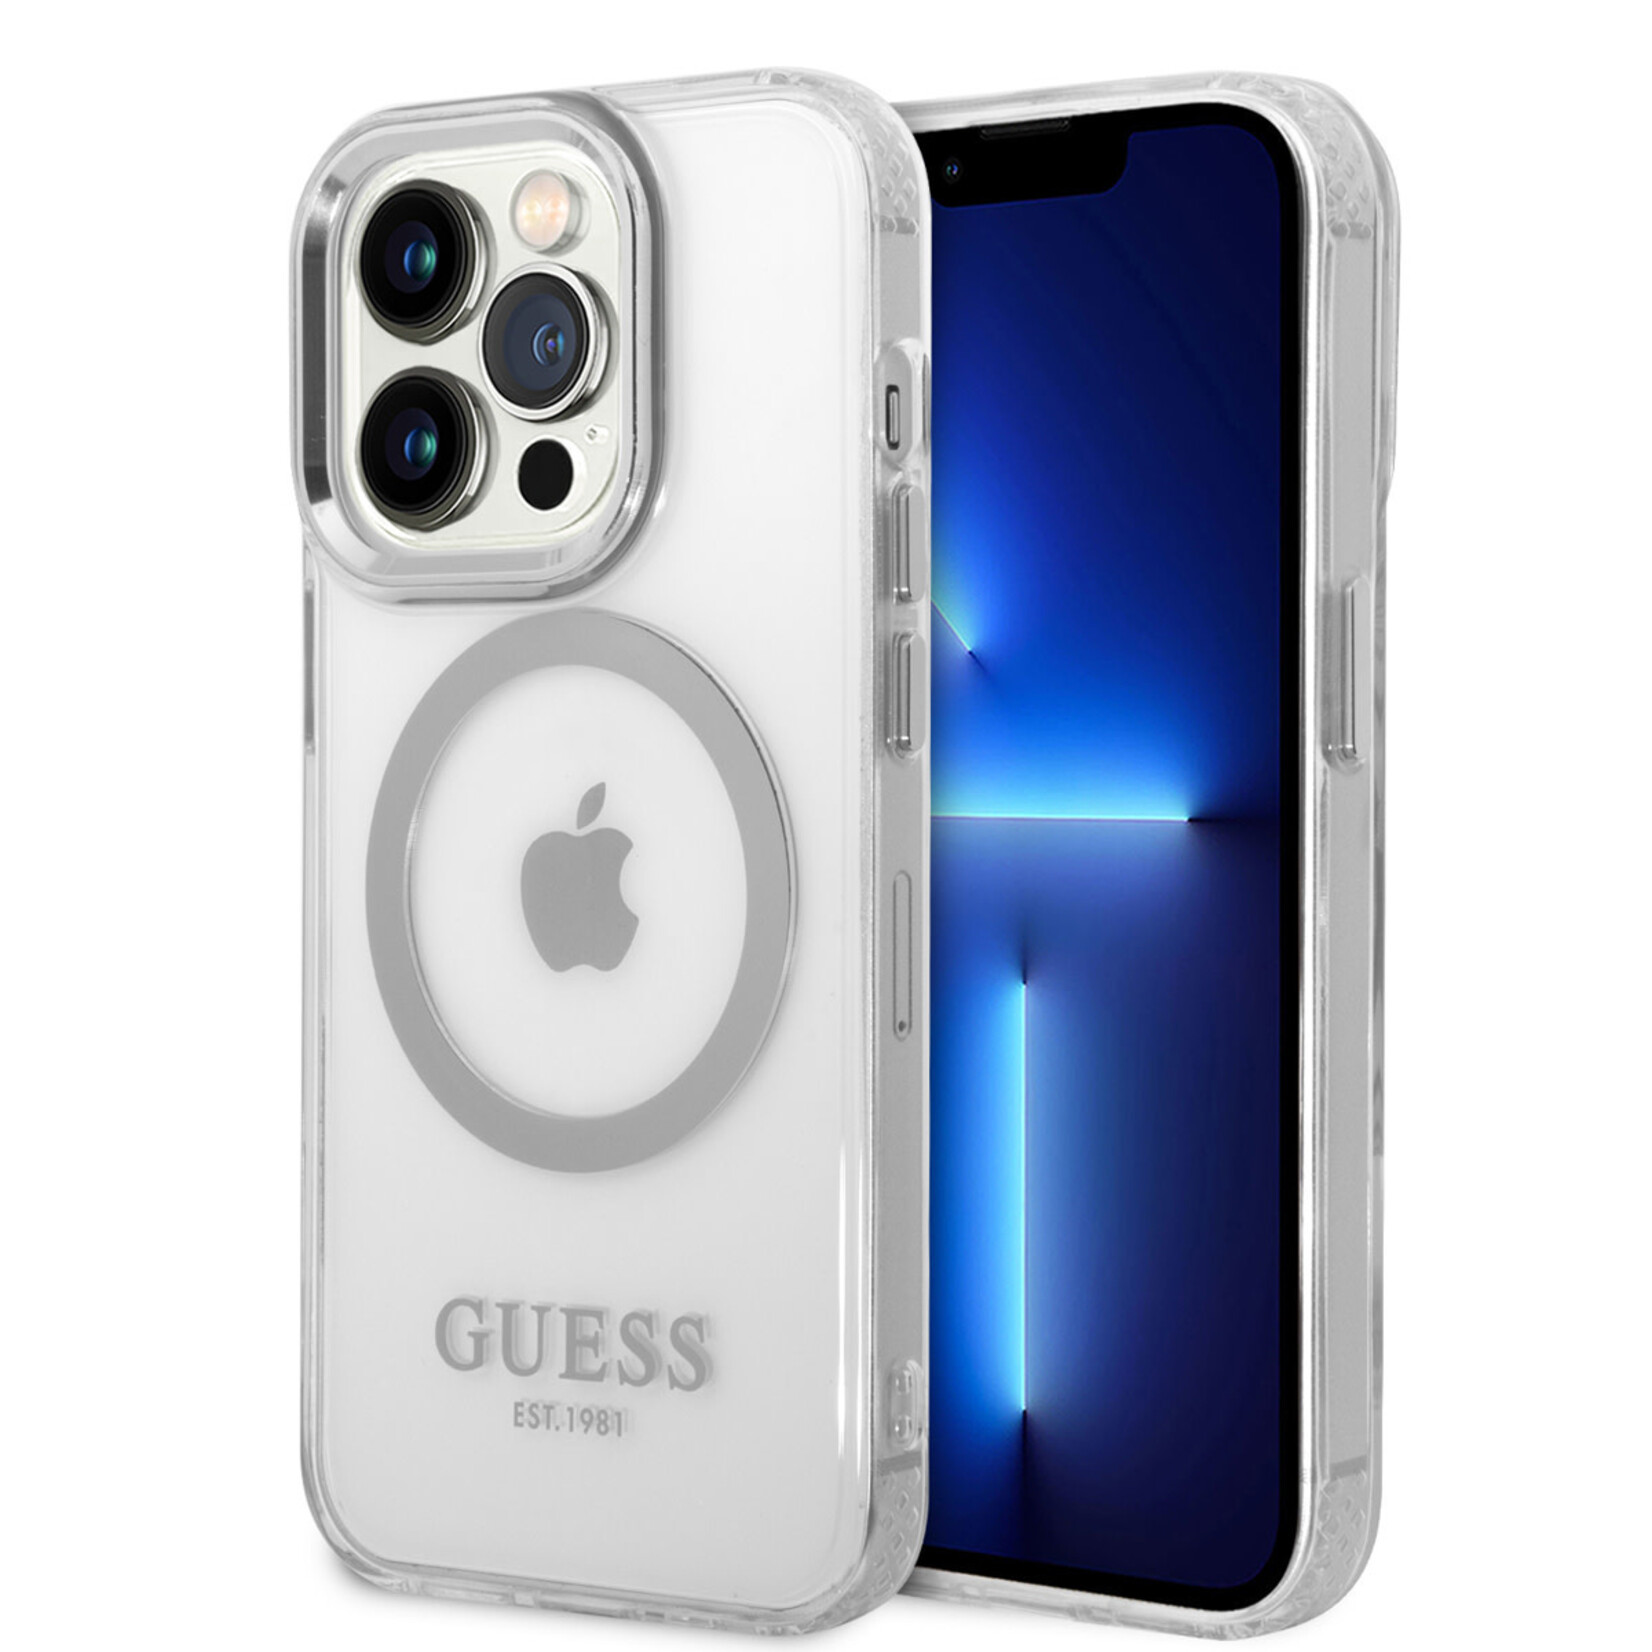 Guess Guess Apple iPhone 14 Pro Max TPU Back Cover Magsafe Telefoonhoesje - Zilver/Transparant - Bescherm je Telefoon